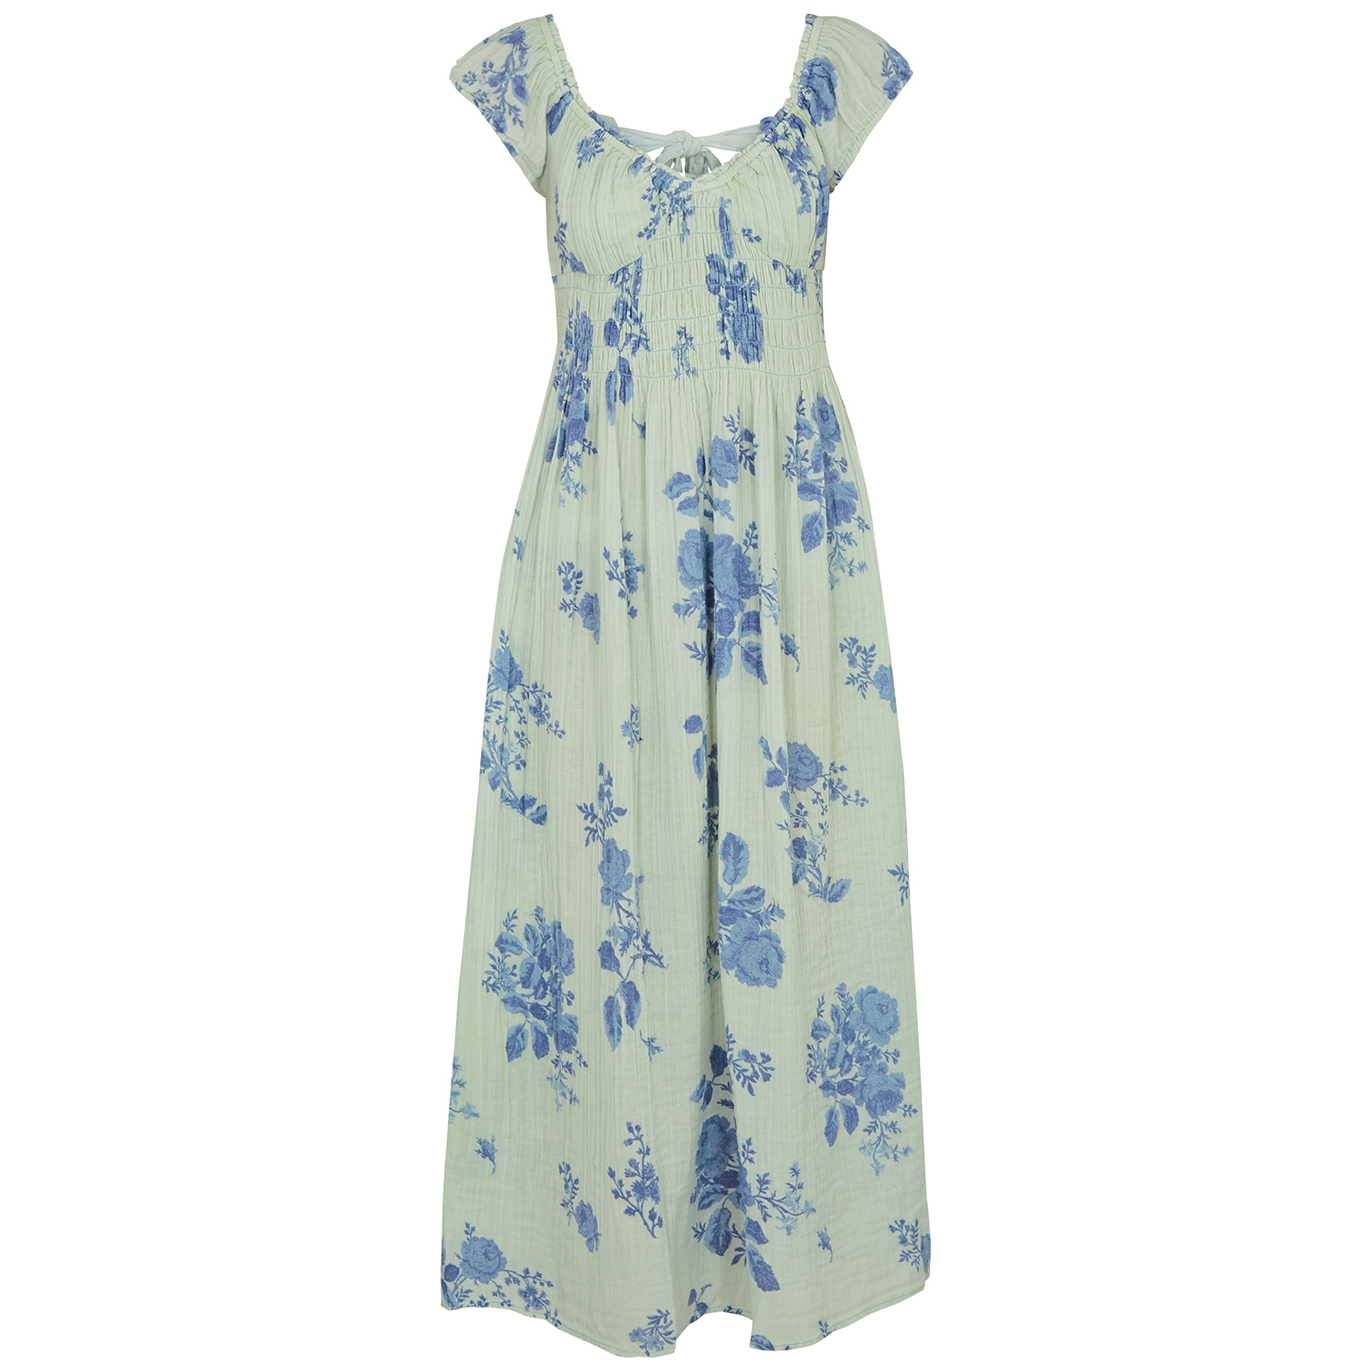 FREE PEOPLE FORGET ME NOT FLORAL-PRINT COTTON MIDI DRESS